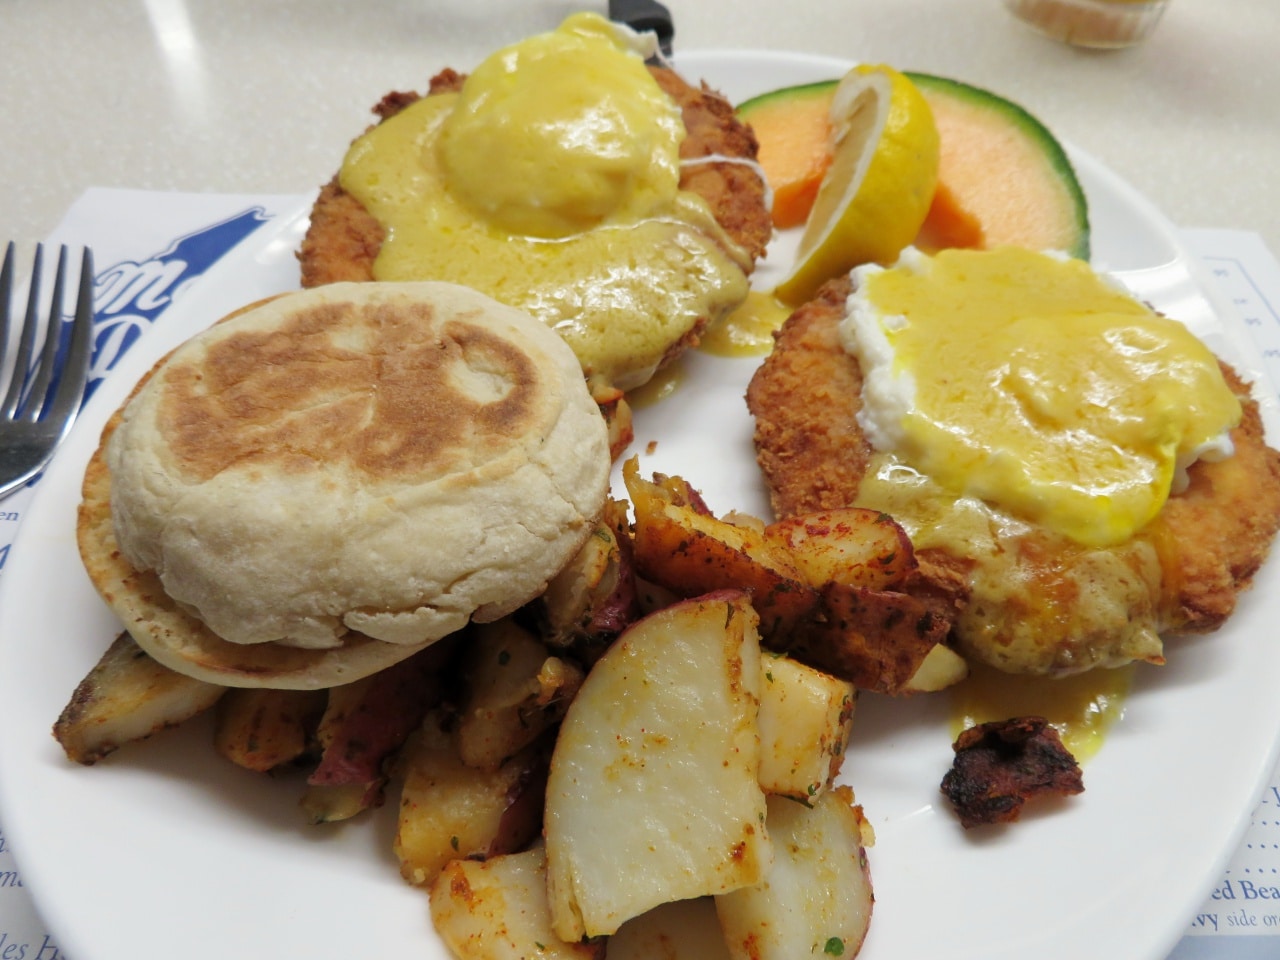 The Myles Henry Downeast Benedict at the Maine Diner in Wells, Maine